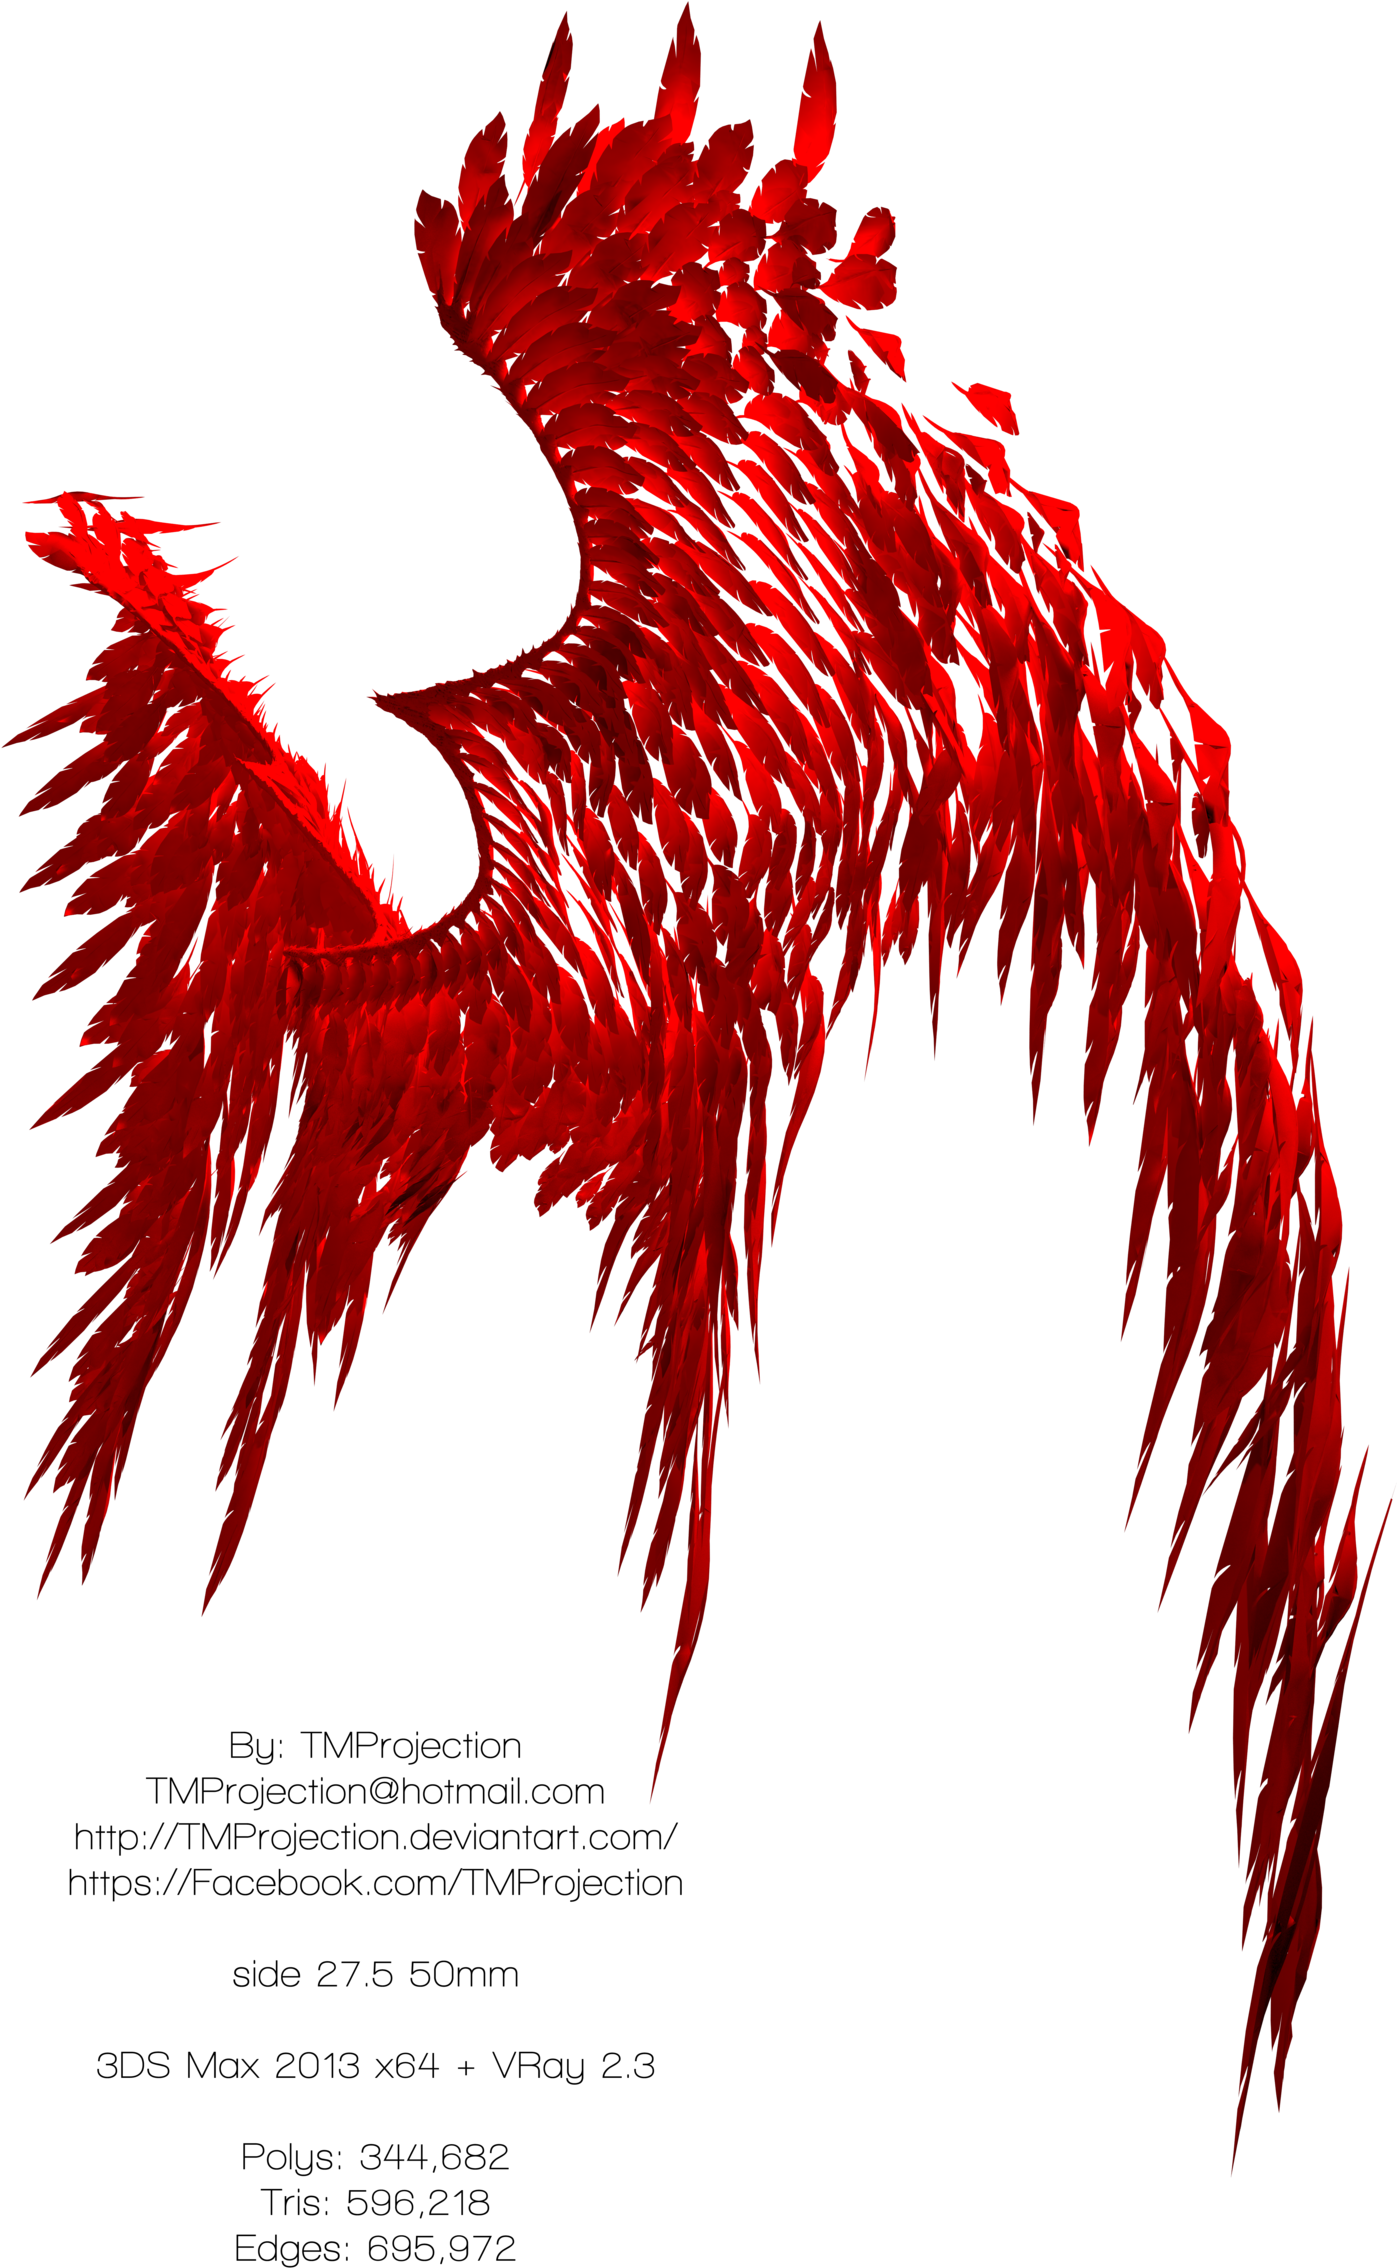 Angel/devil Wings Free Stock 8k Resolution 9 By Tmprojection - Graphic Design (1600x2416)